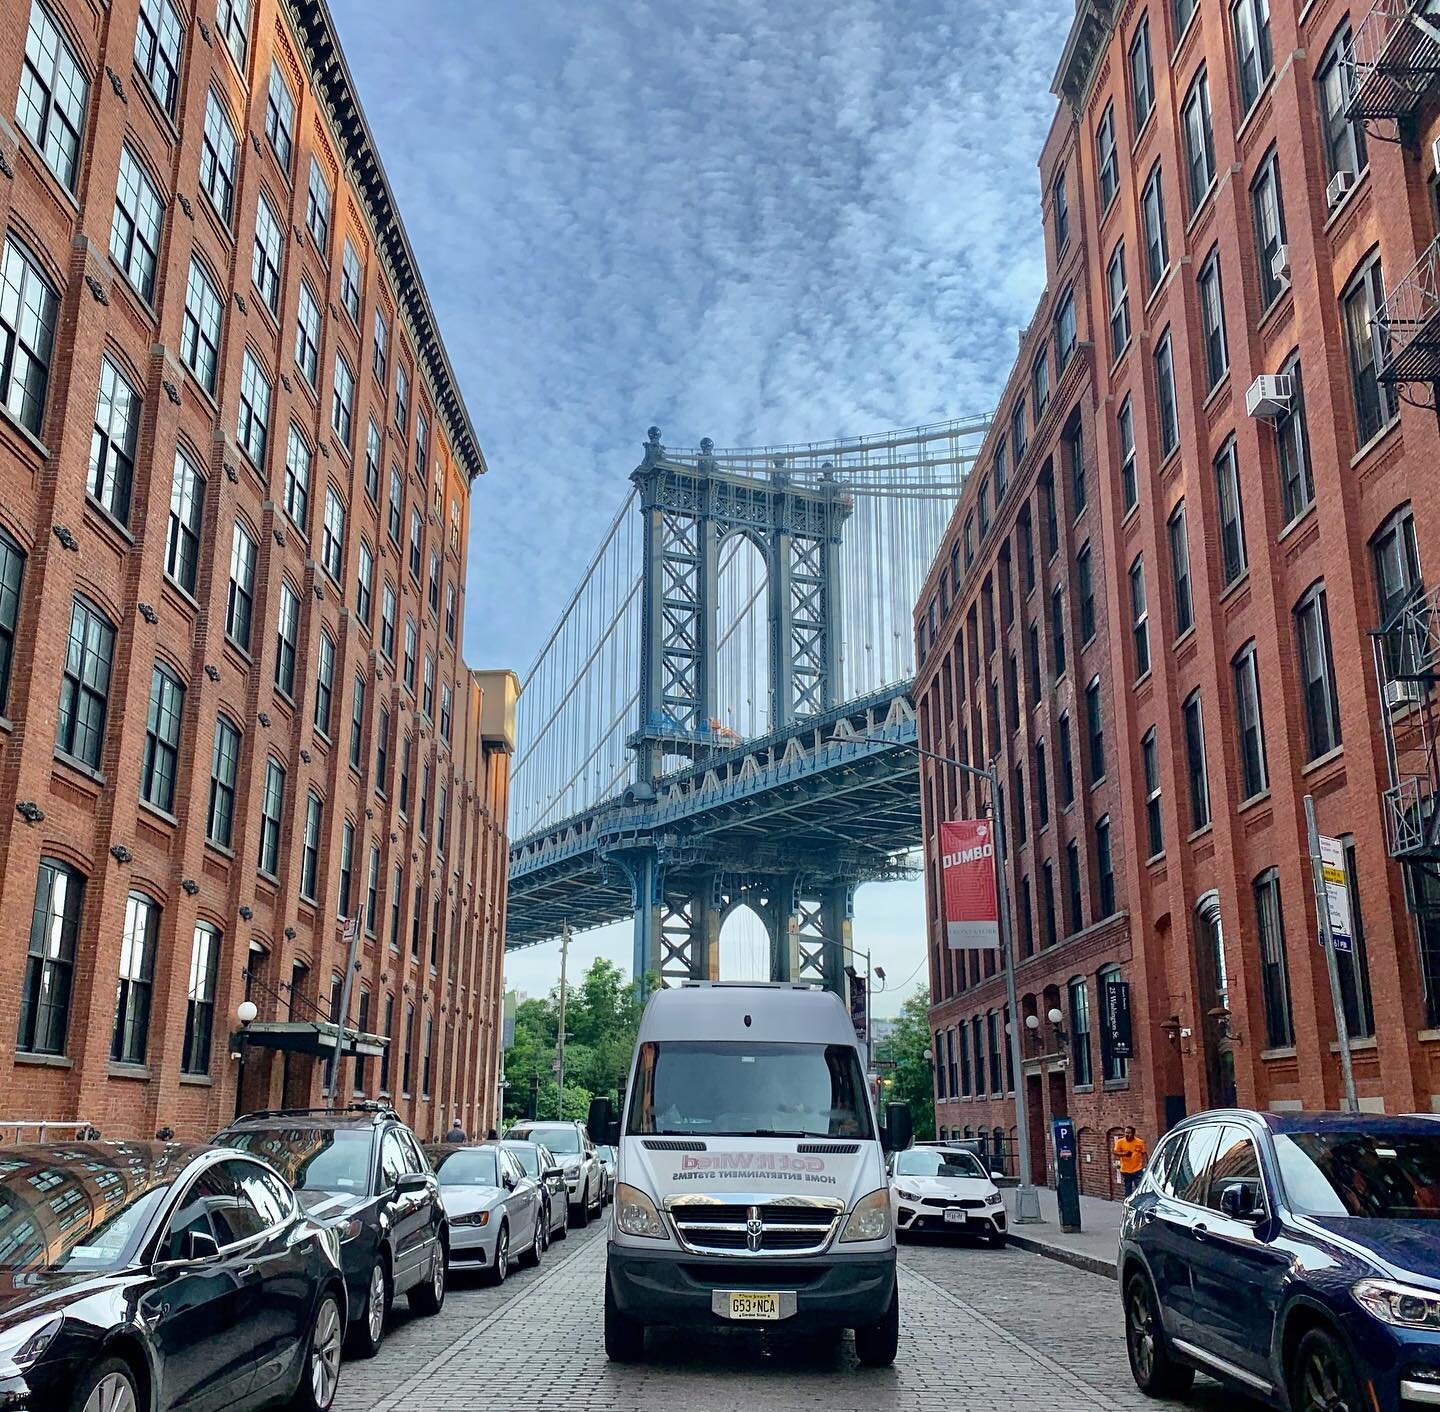 The idea of #vanlife started for me in New York City over 5 years ago. Now, I&rsquo;m here with a van and a partner who makes my favorite city a million times better. Dream big, folks! 💖🦄🌈🗽 

#manhattanbridge #newyorkcity #eugenedesalignac #dumbo